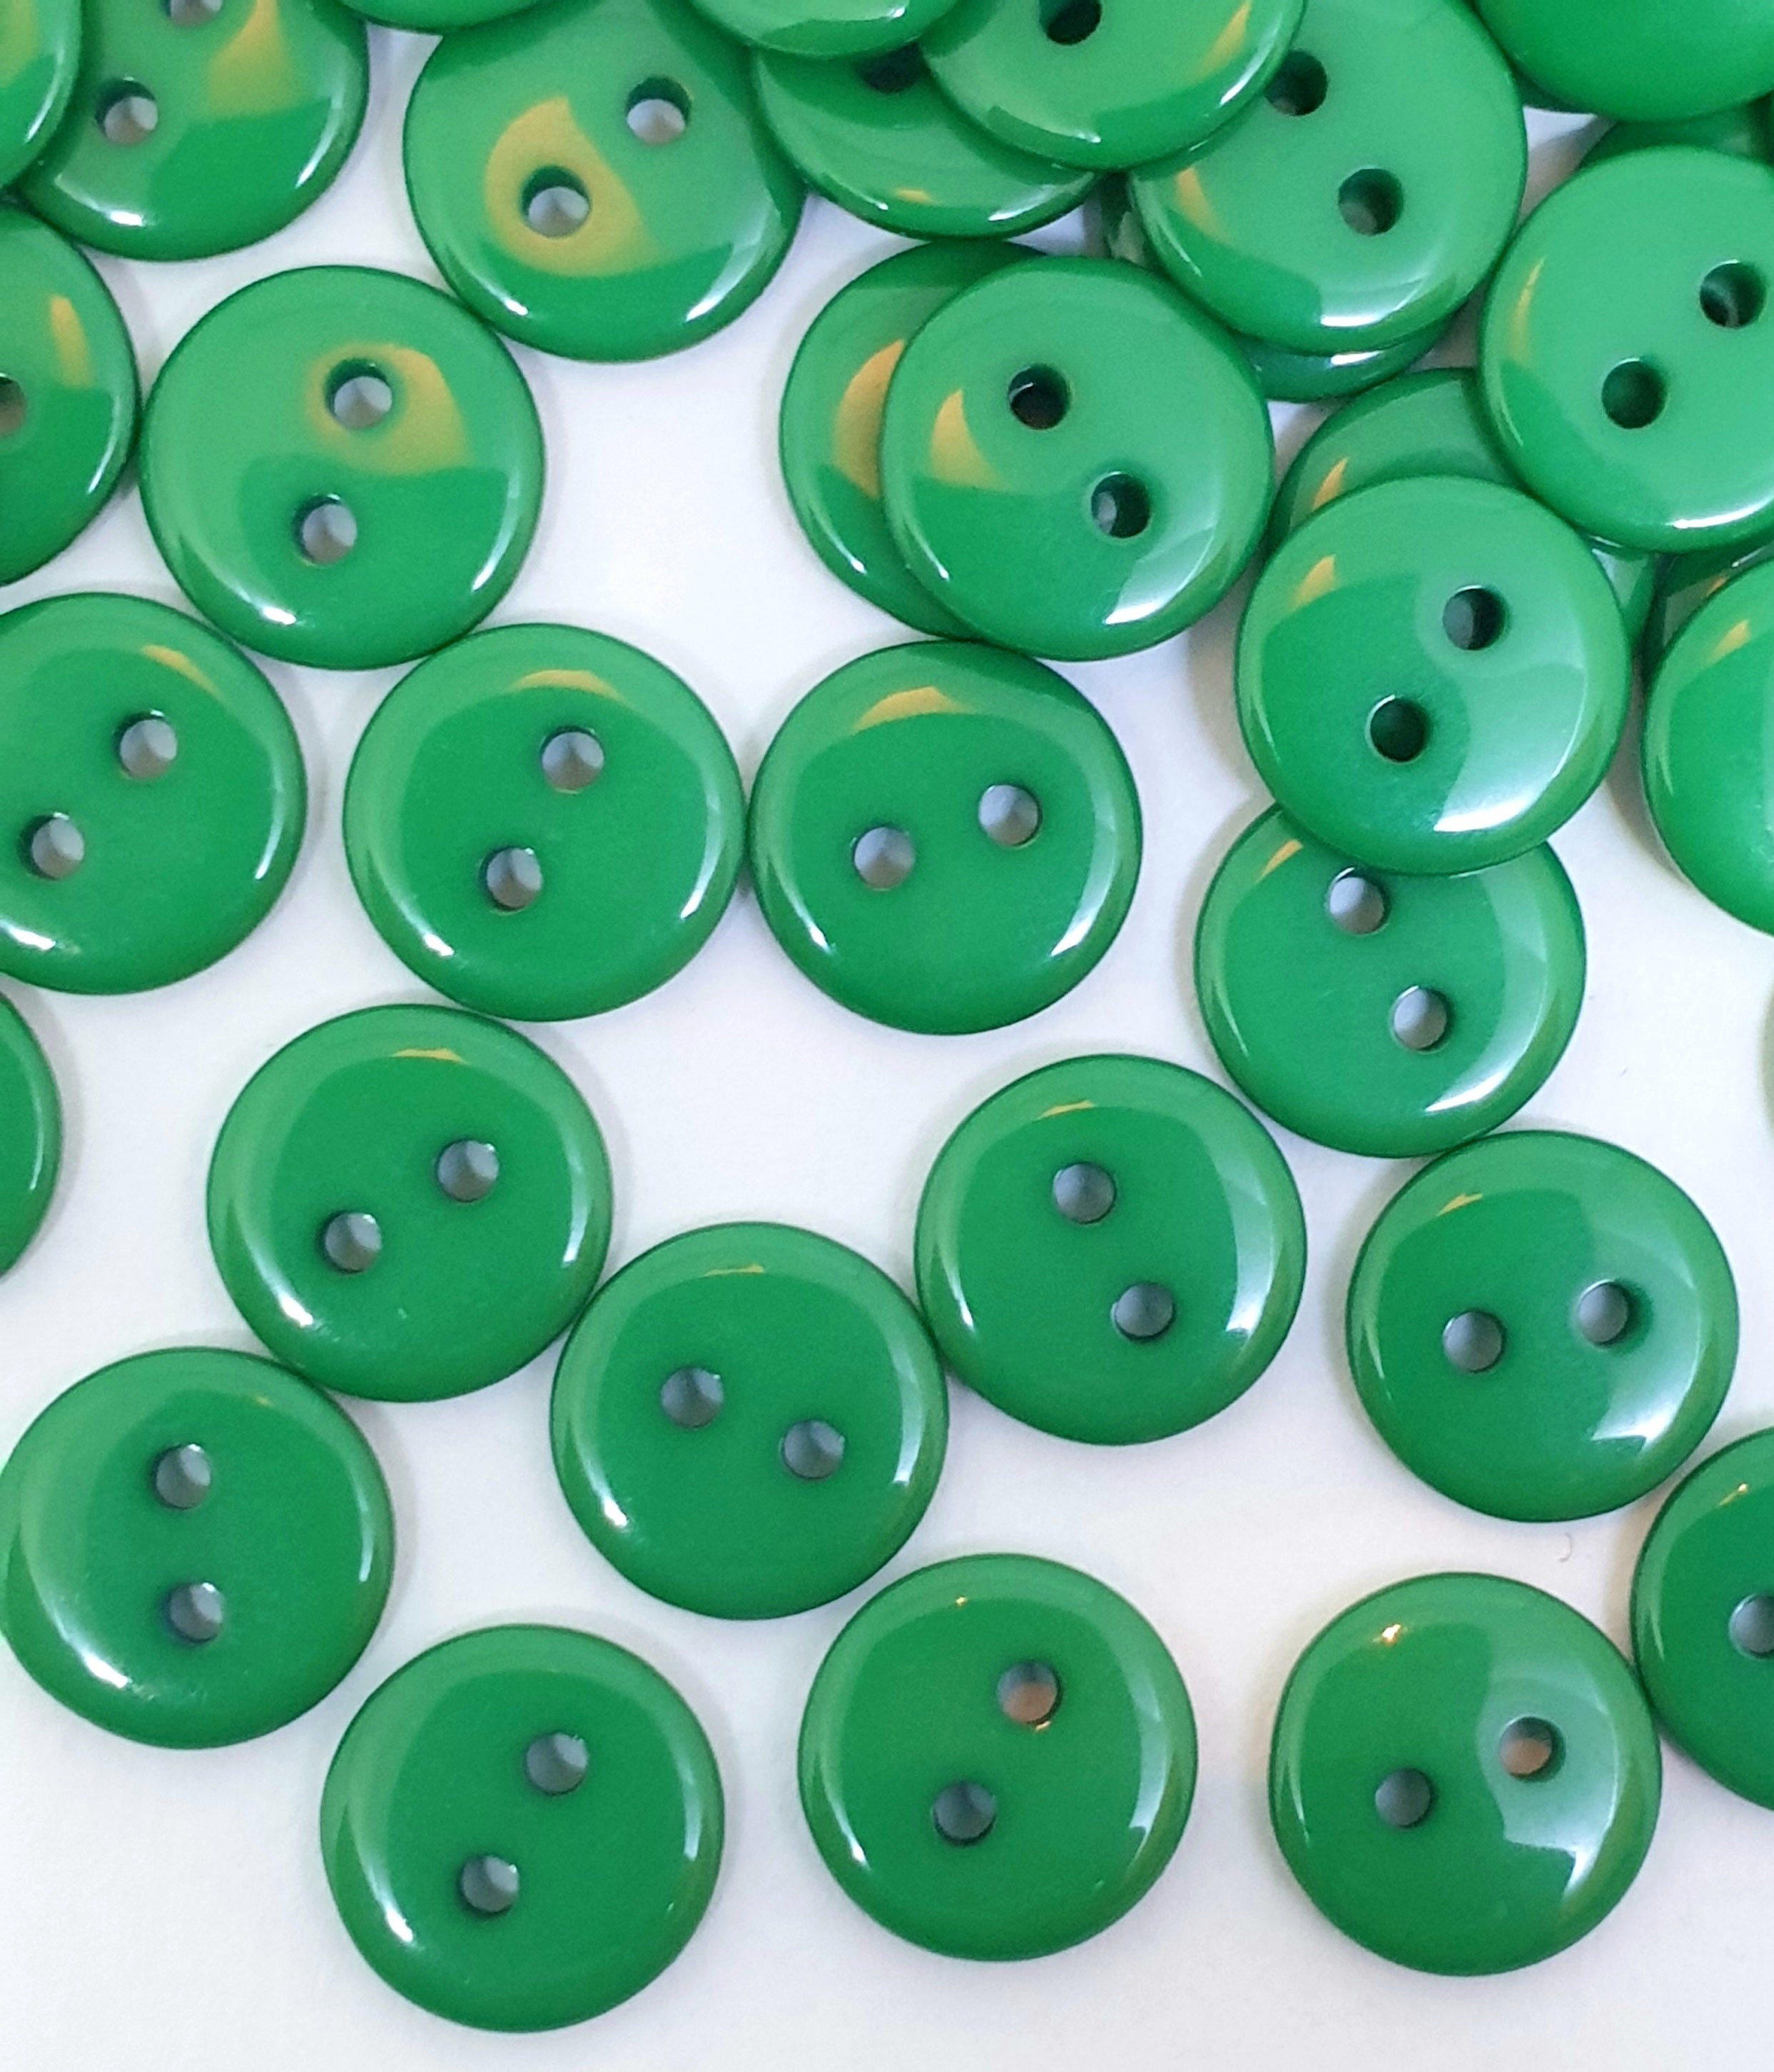 MajorCrafts 120pcs 9mm Dark Green Small 2 Holes Round Resin Sewing Buttons B17